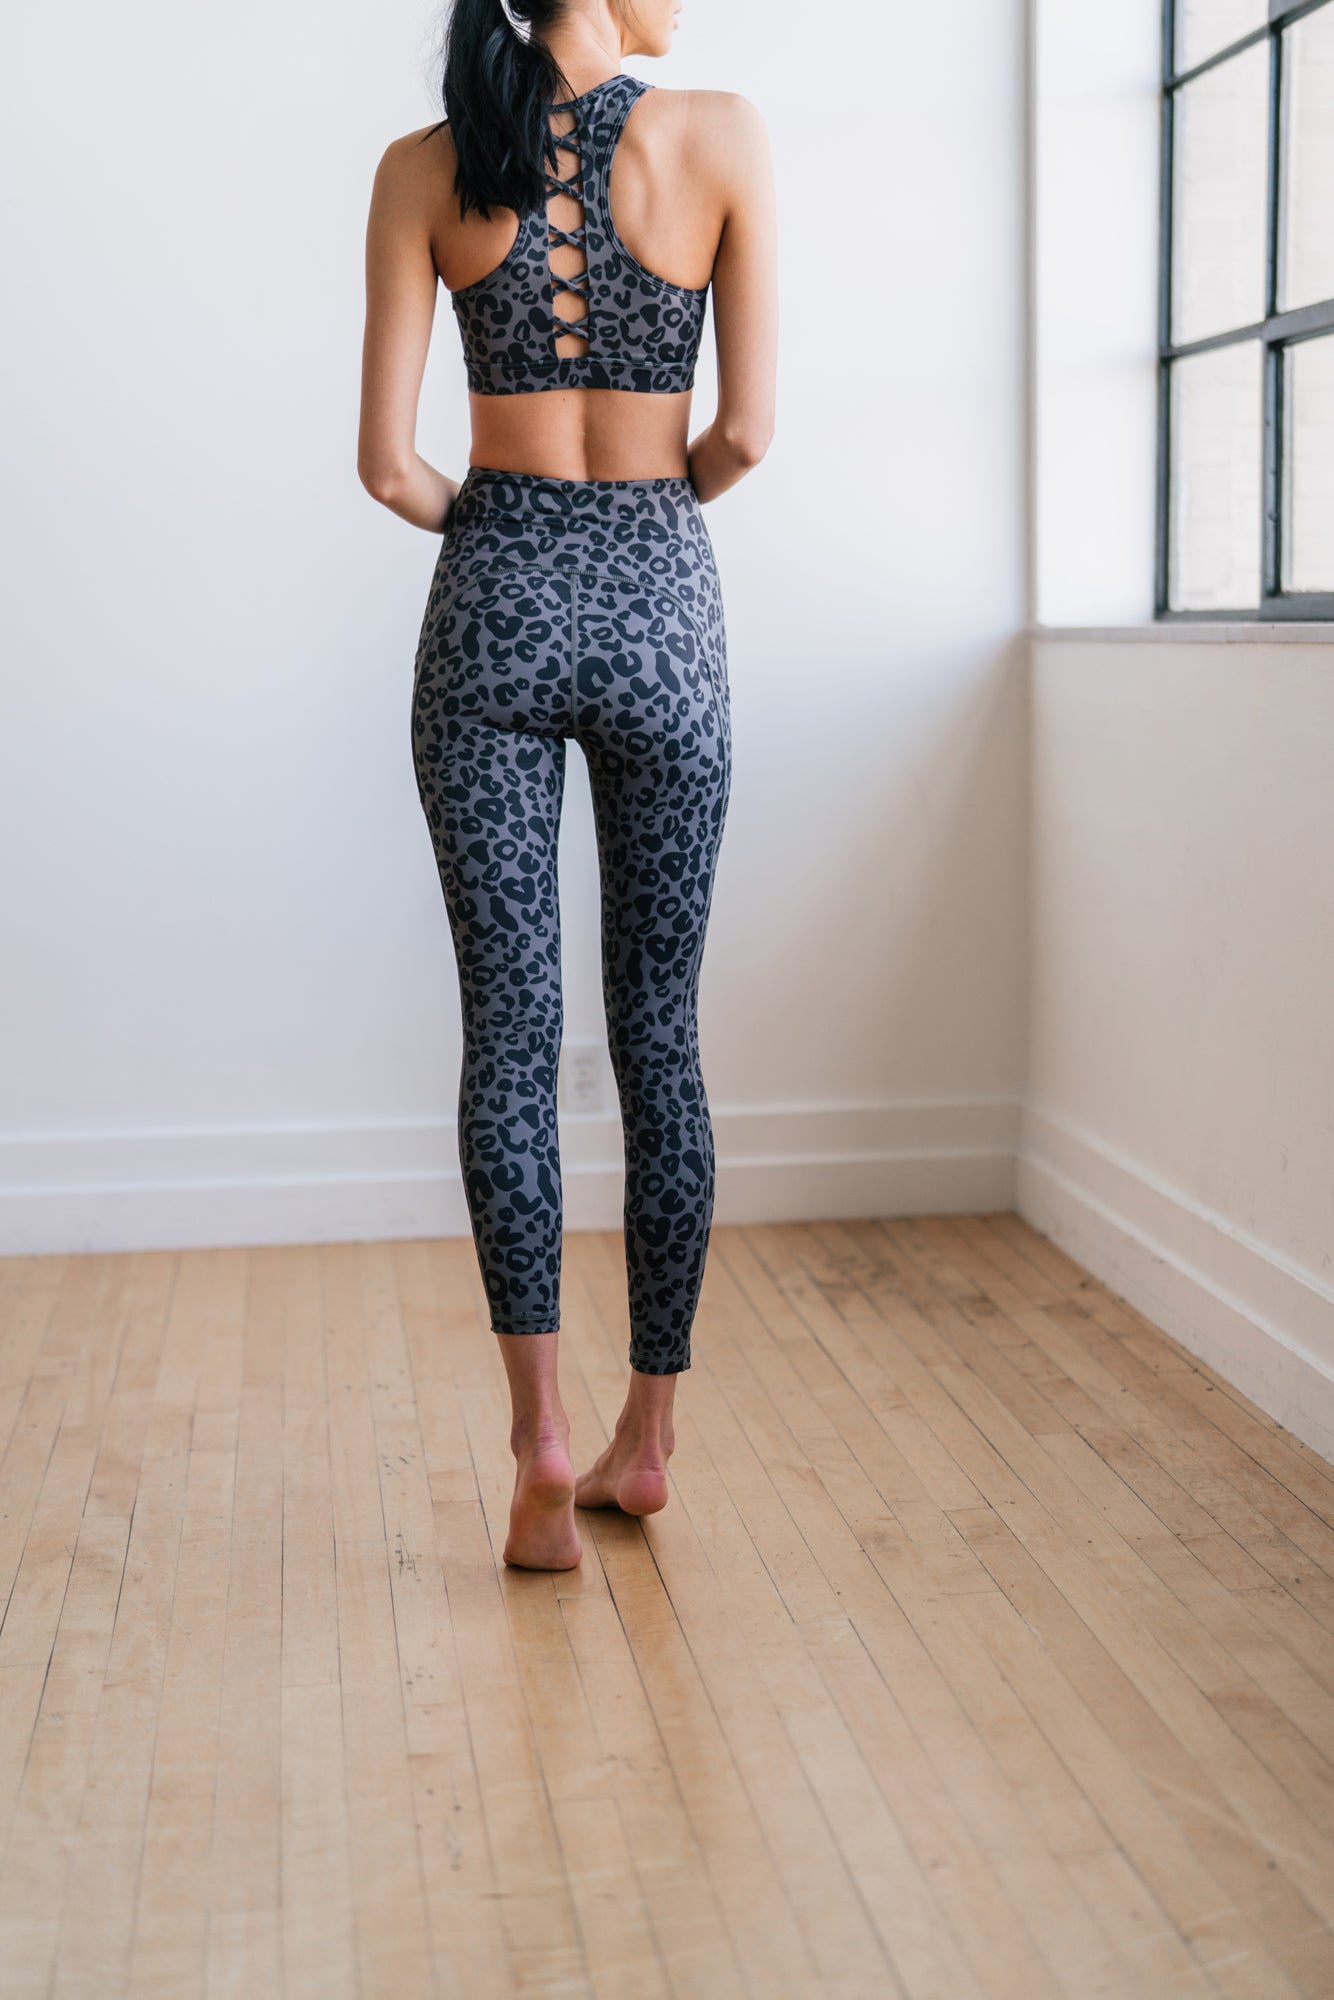 Grey Leopard Leggings with Pockets That Don't Roll Down